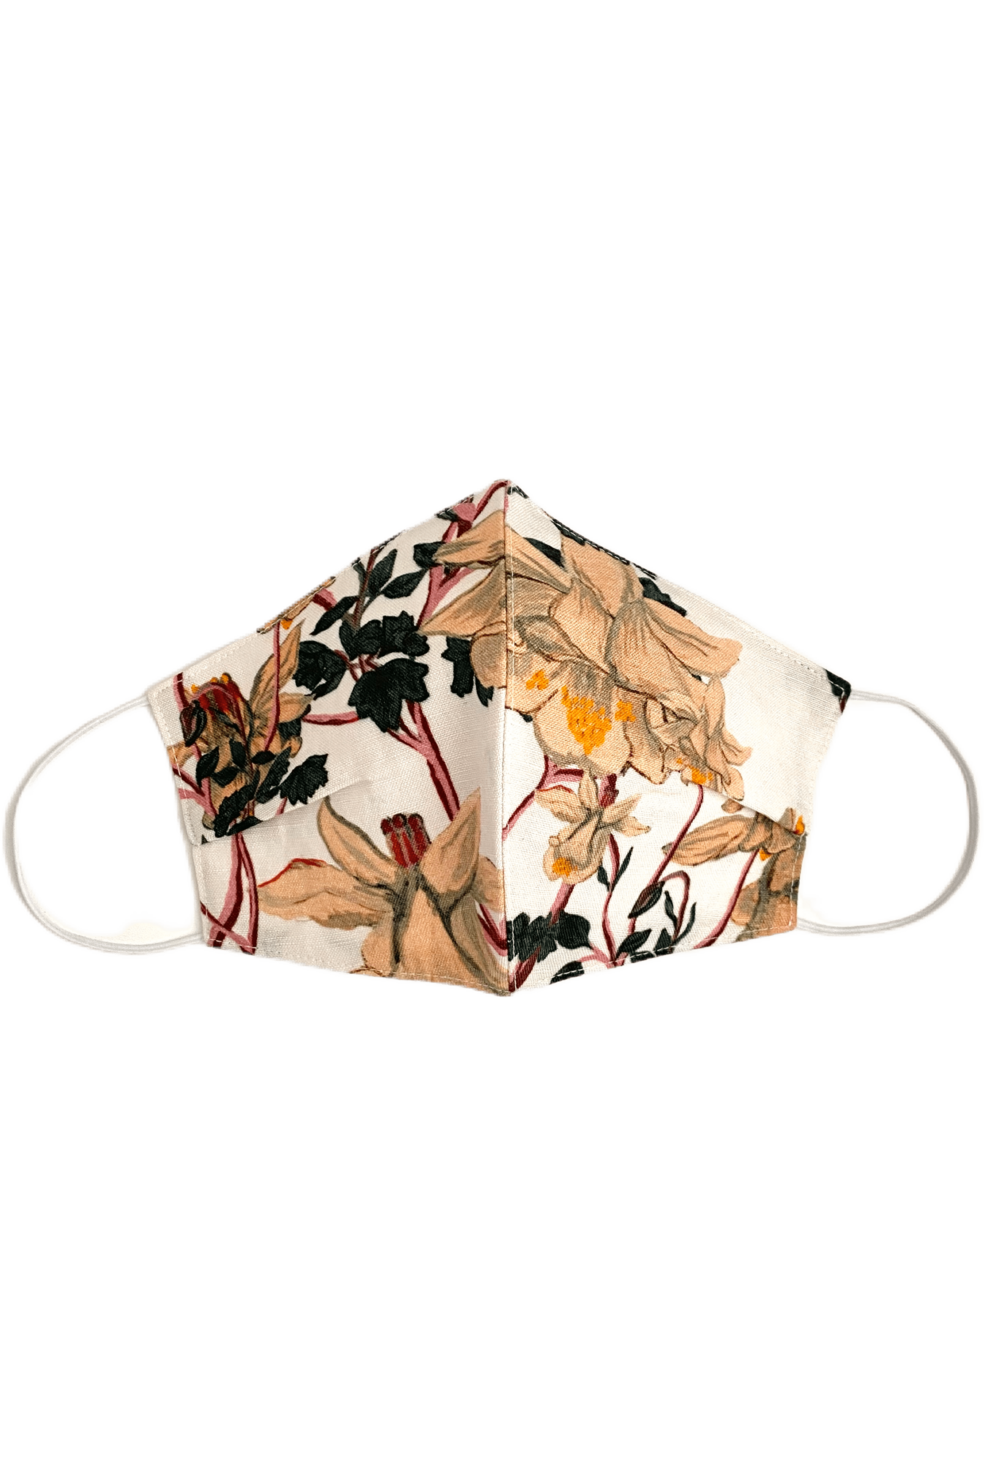 Fabric Masks with Filter Pocket & Nose Wire Fabric Masks CHRISTINE ALCALAY Floral (Linen/Rayon Shell) Extra Small 